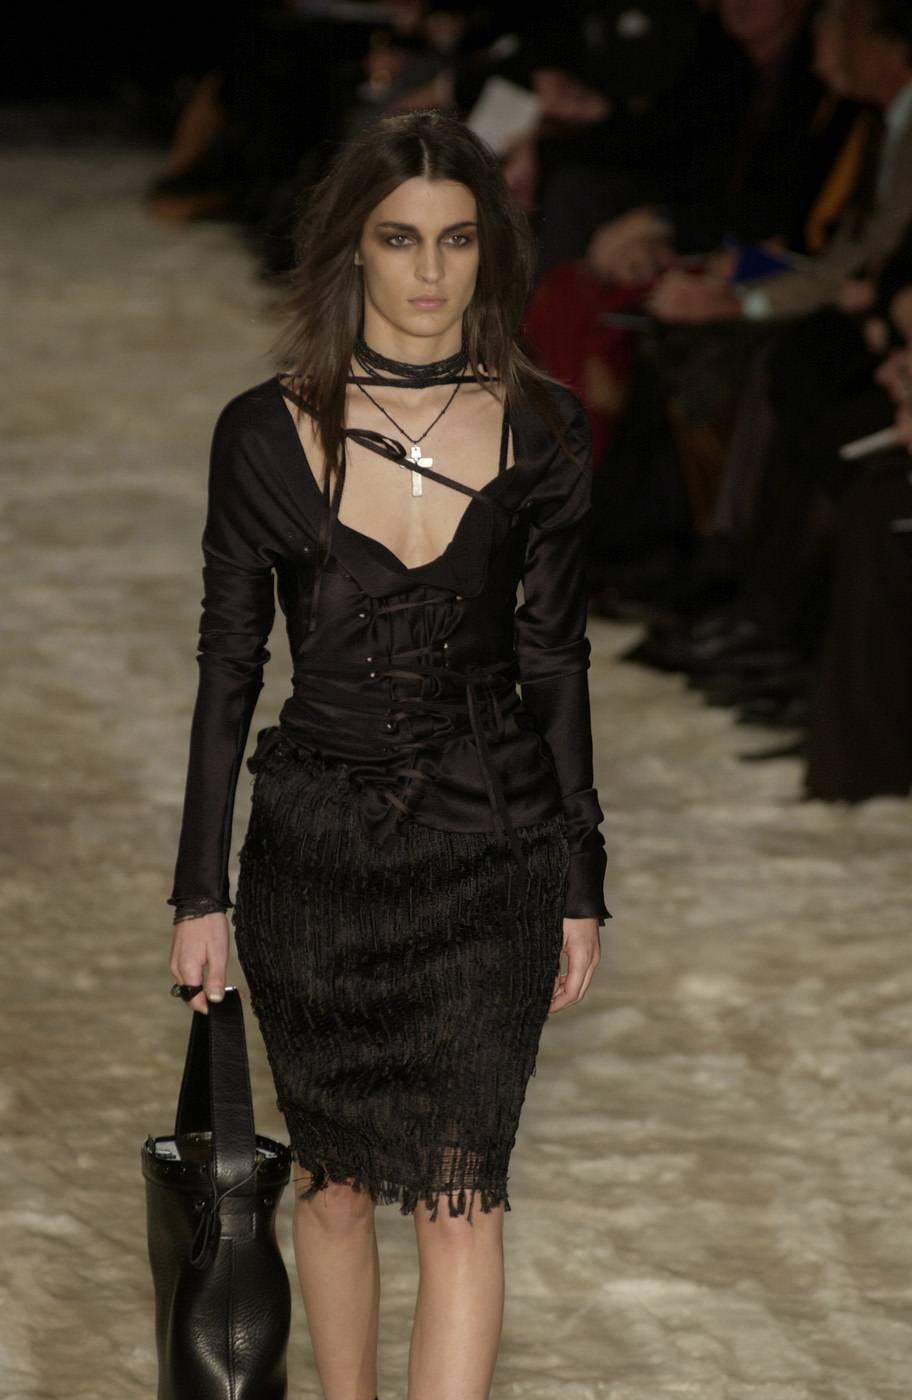 Women's Free Shipping: Tom Ford Gucci FW 2002 Black Silk Gothic Runway Blouse & Skirt!